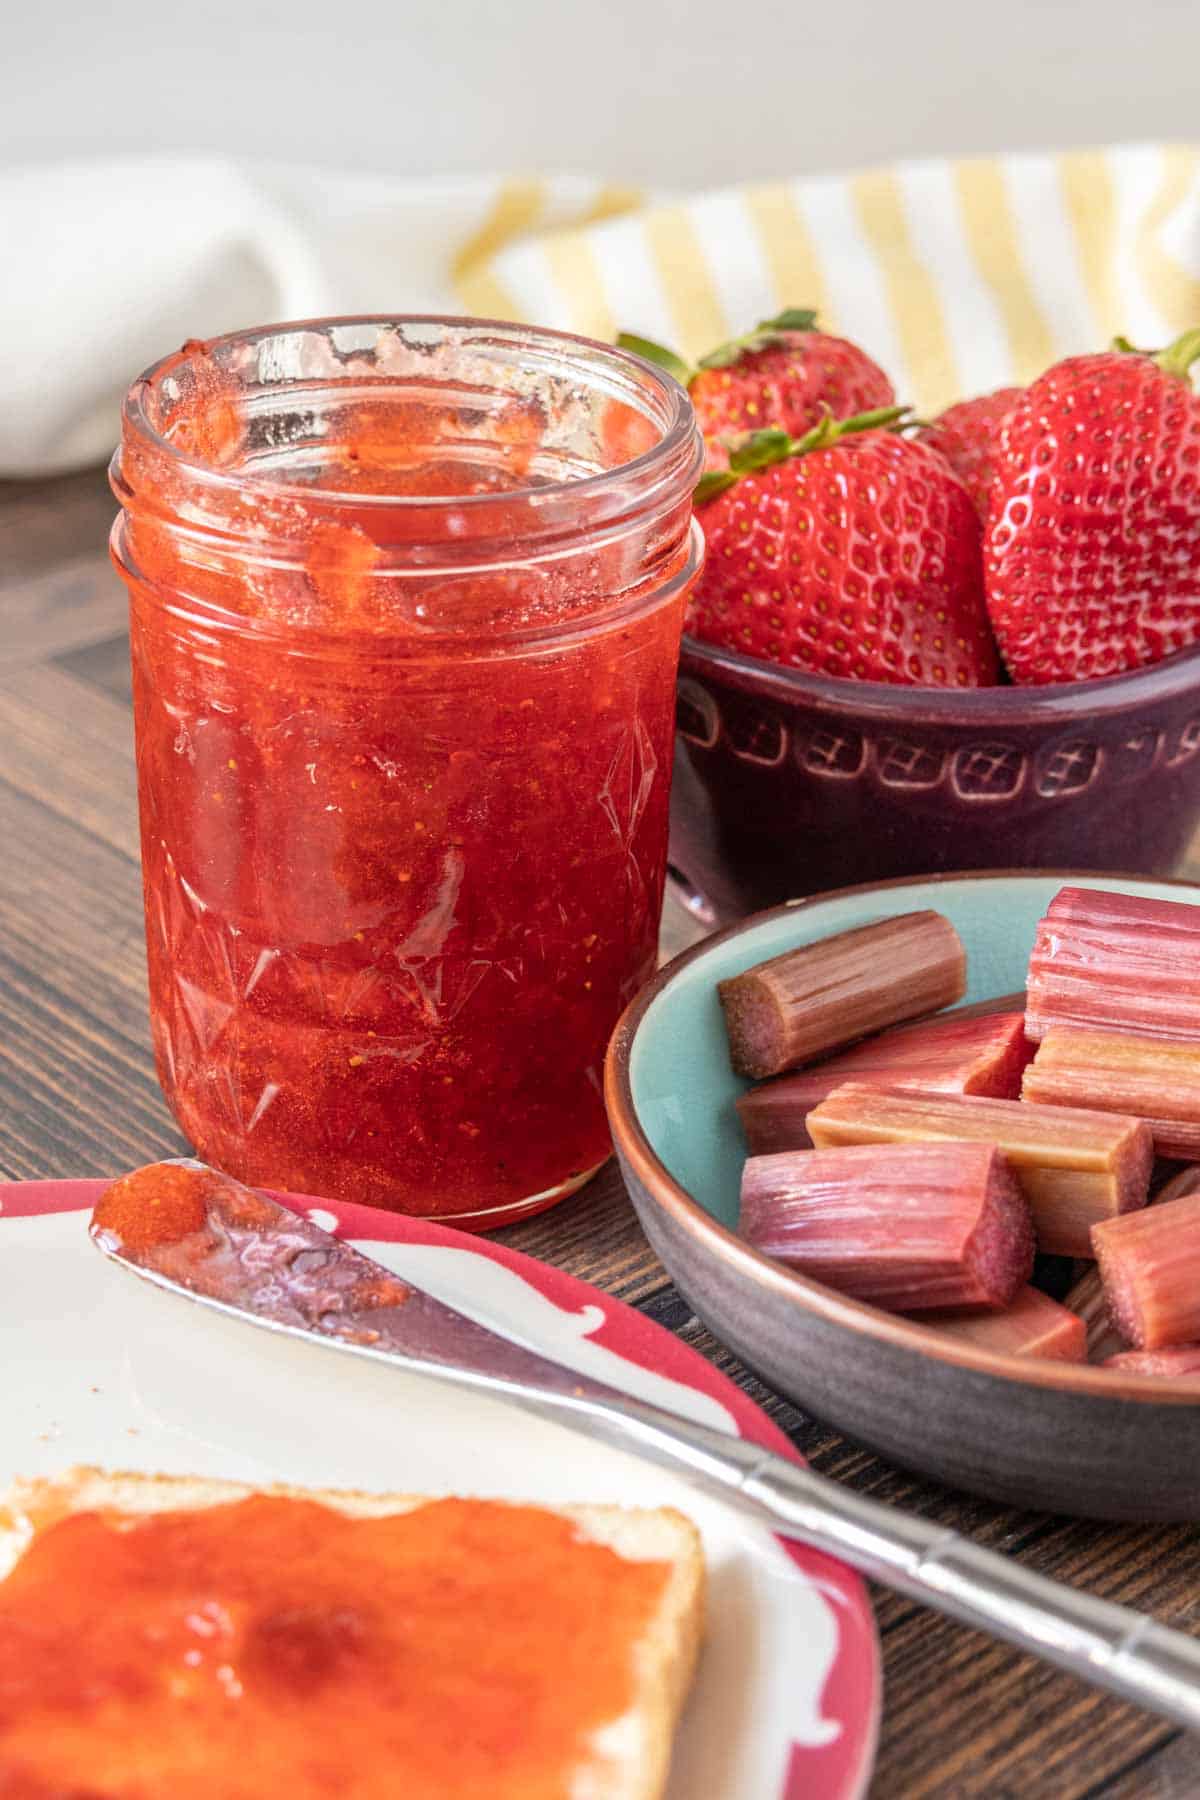 Open jar of strawberry rhubarb jam alongside bowls of strawberries and rhubarb, with a plate of toast in the front.